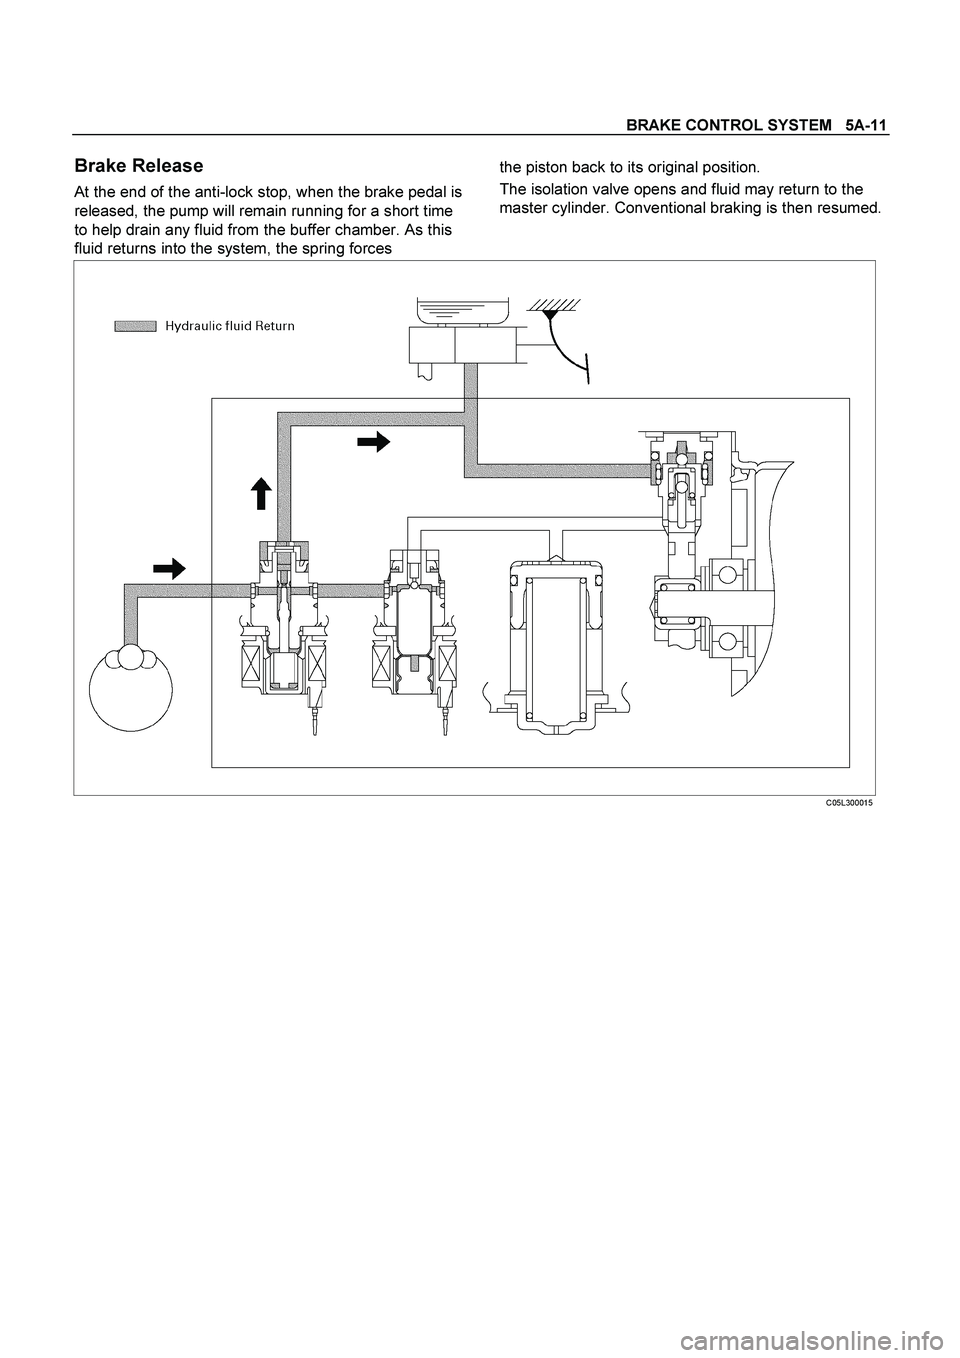 ISUZU TF SERIES 2004  Workshop Manual BRAKE CONTROL SYSTEM   5A-11
 
Brake Release 
At the end of the anti-lock stop, when the brake pedal is 
released, the pump will remain running for a short time 
to help drain any fluid from the buffe